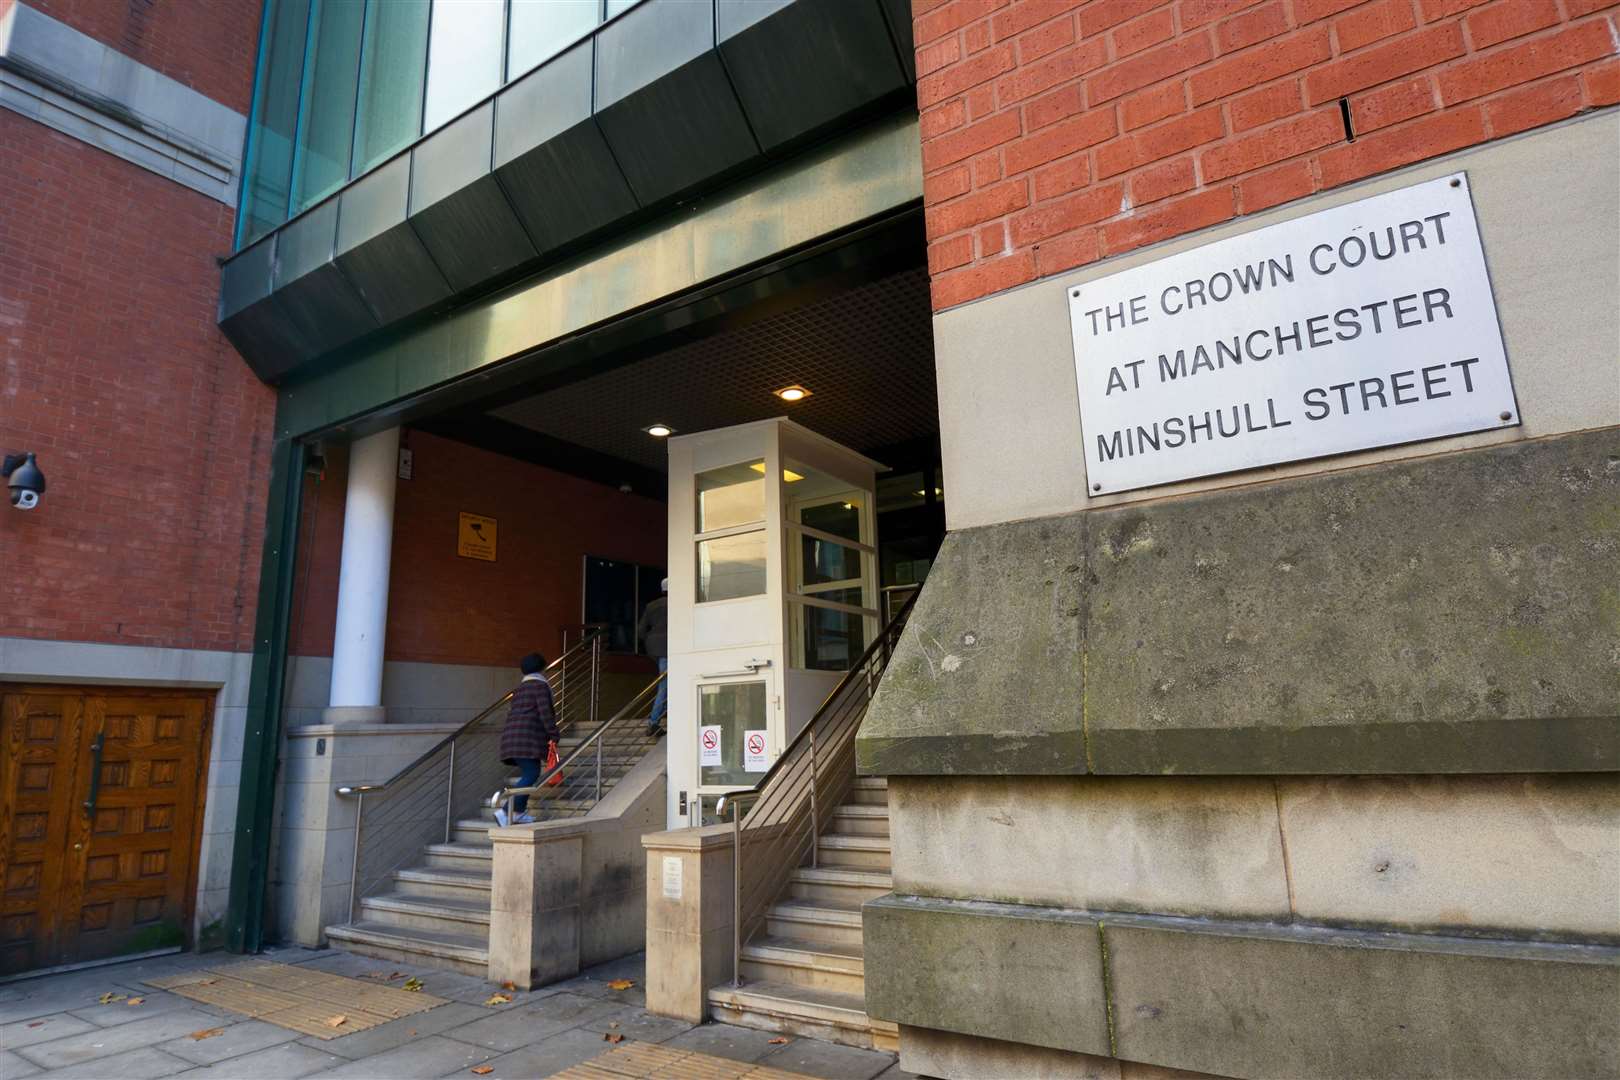 The case is being heard at Minshull Street Crown Court in Manchester (Alamy/PA)